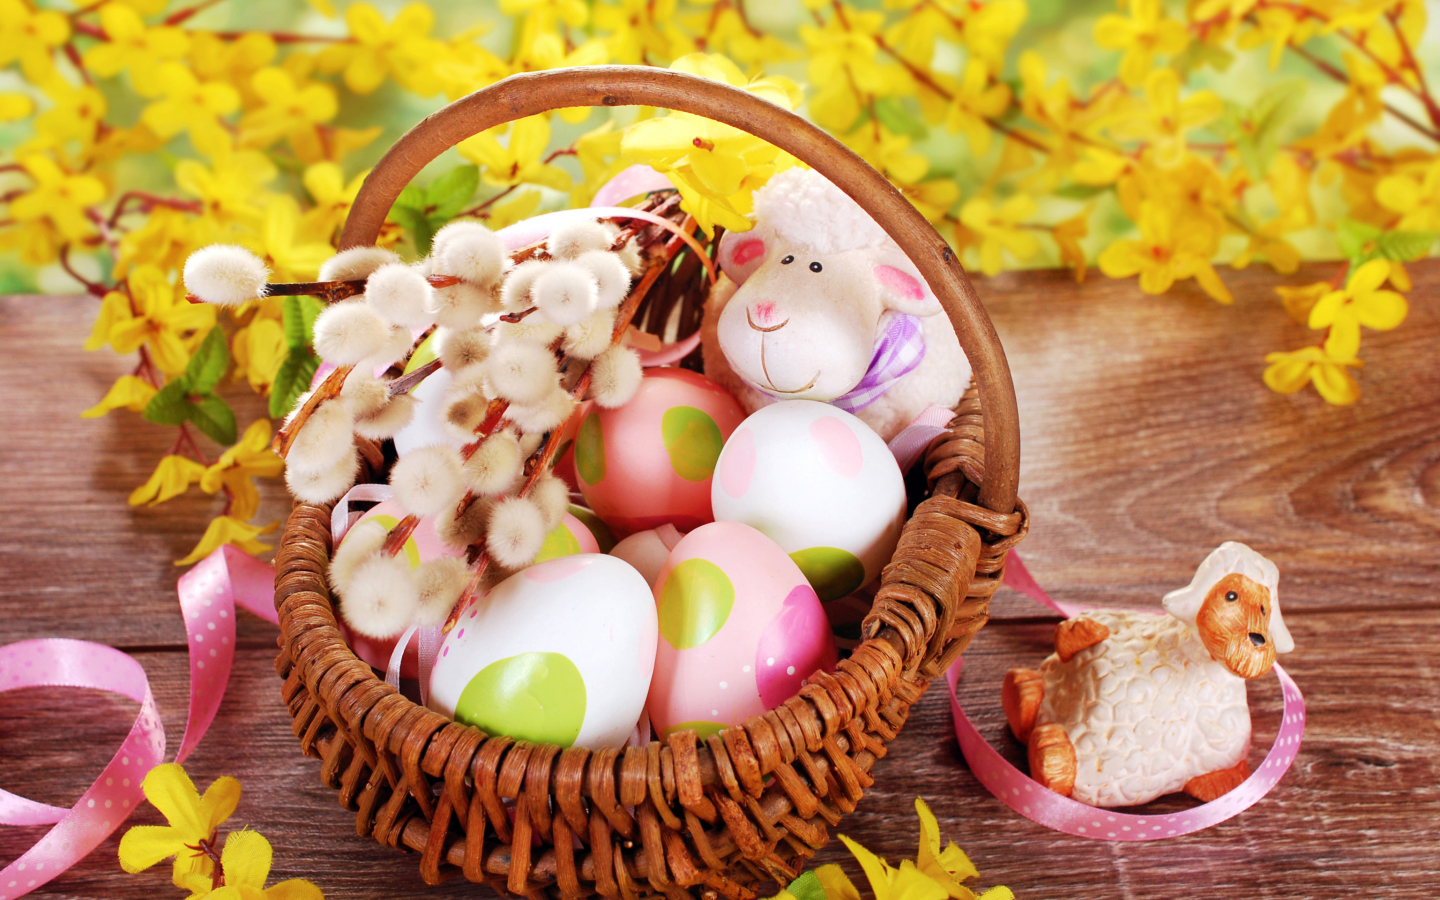 Easter Basket And Sheep wallpaper 1440x900